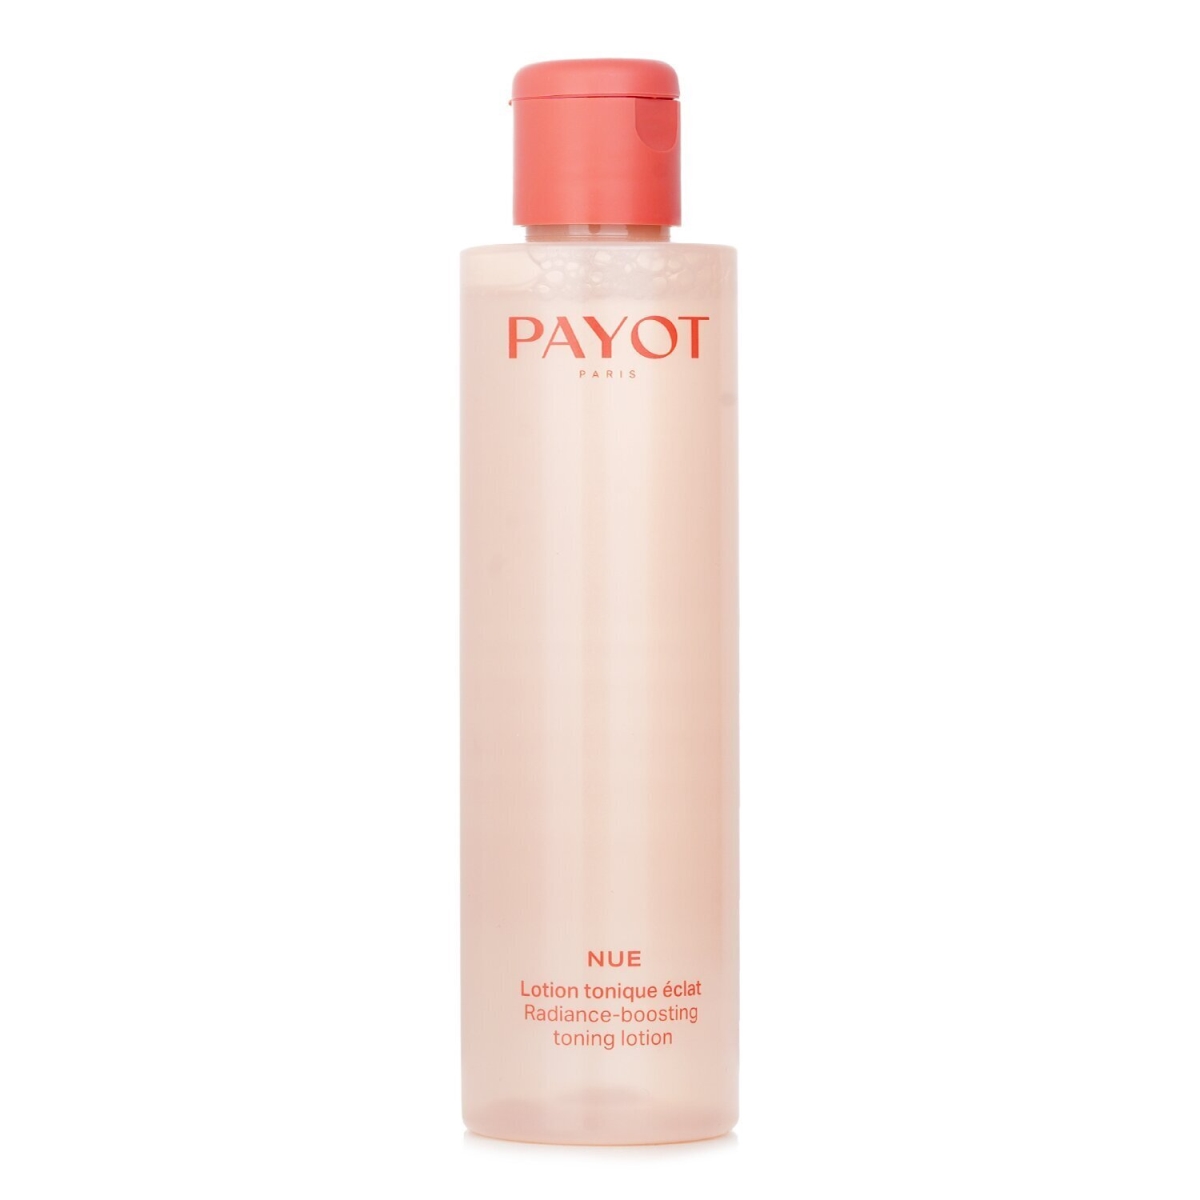 Payot 305974 200 ml Nue Lotion Tonique Eclat Toning Lotion